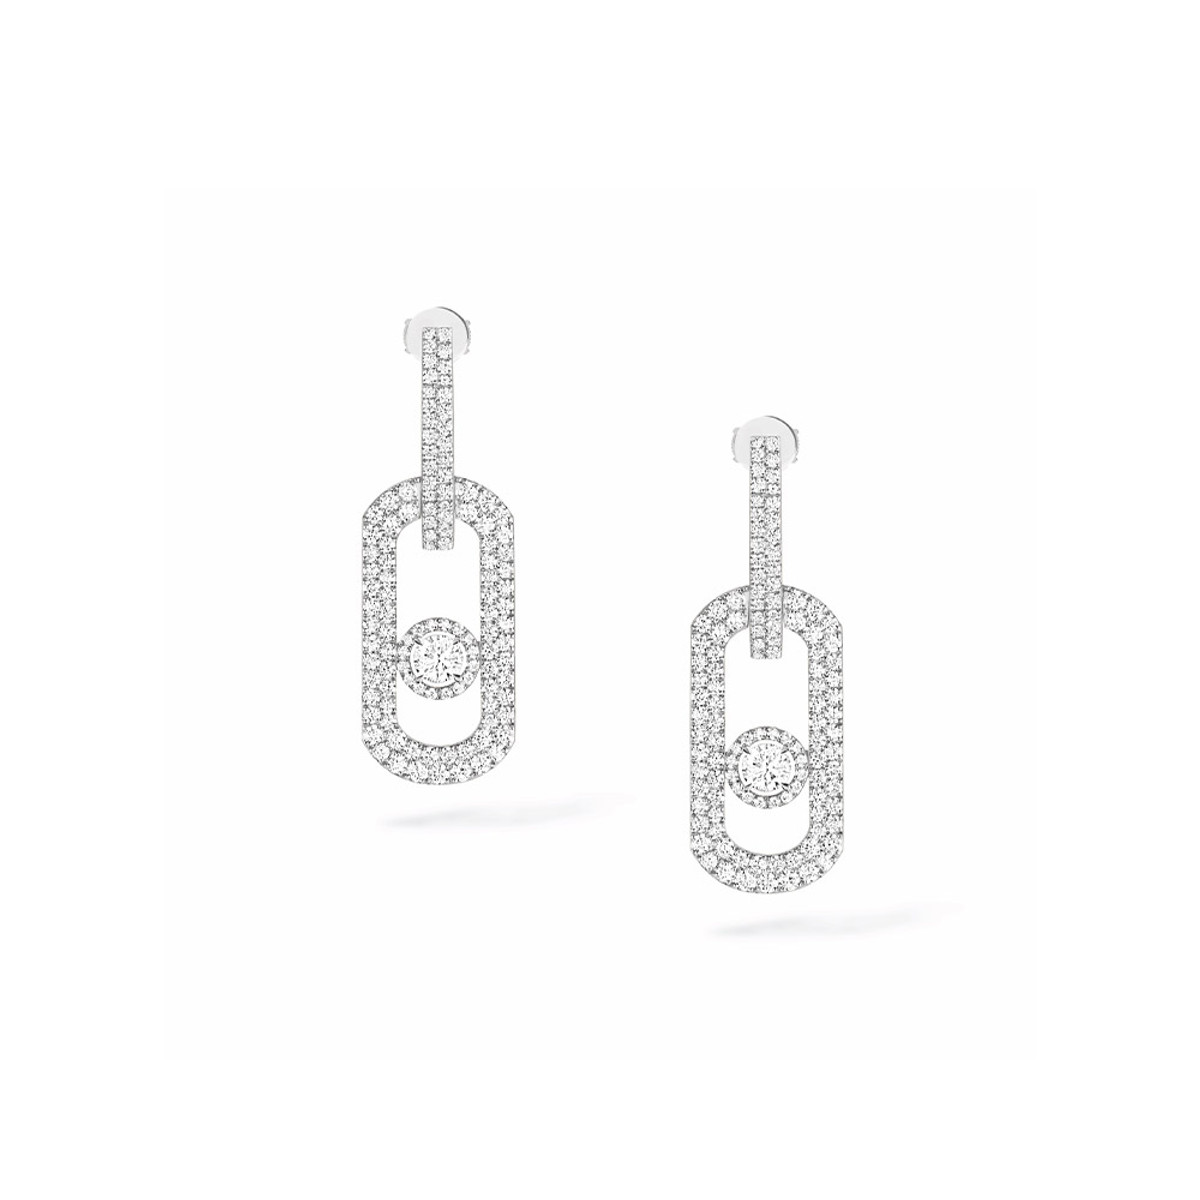 Messika 18K White Gold Move Citizen XL Diamond Pave Earrings-56331 Product Image